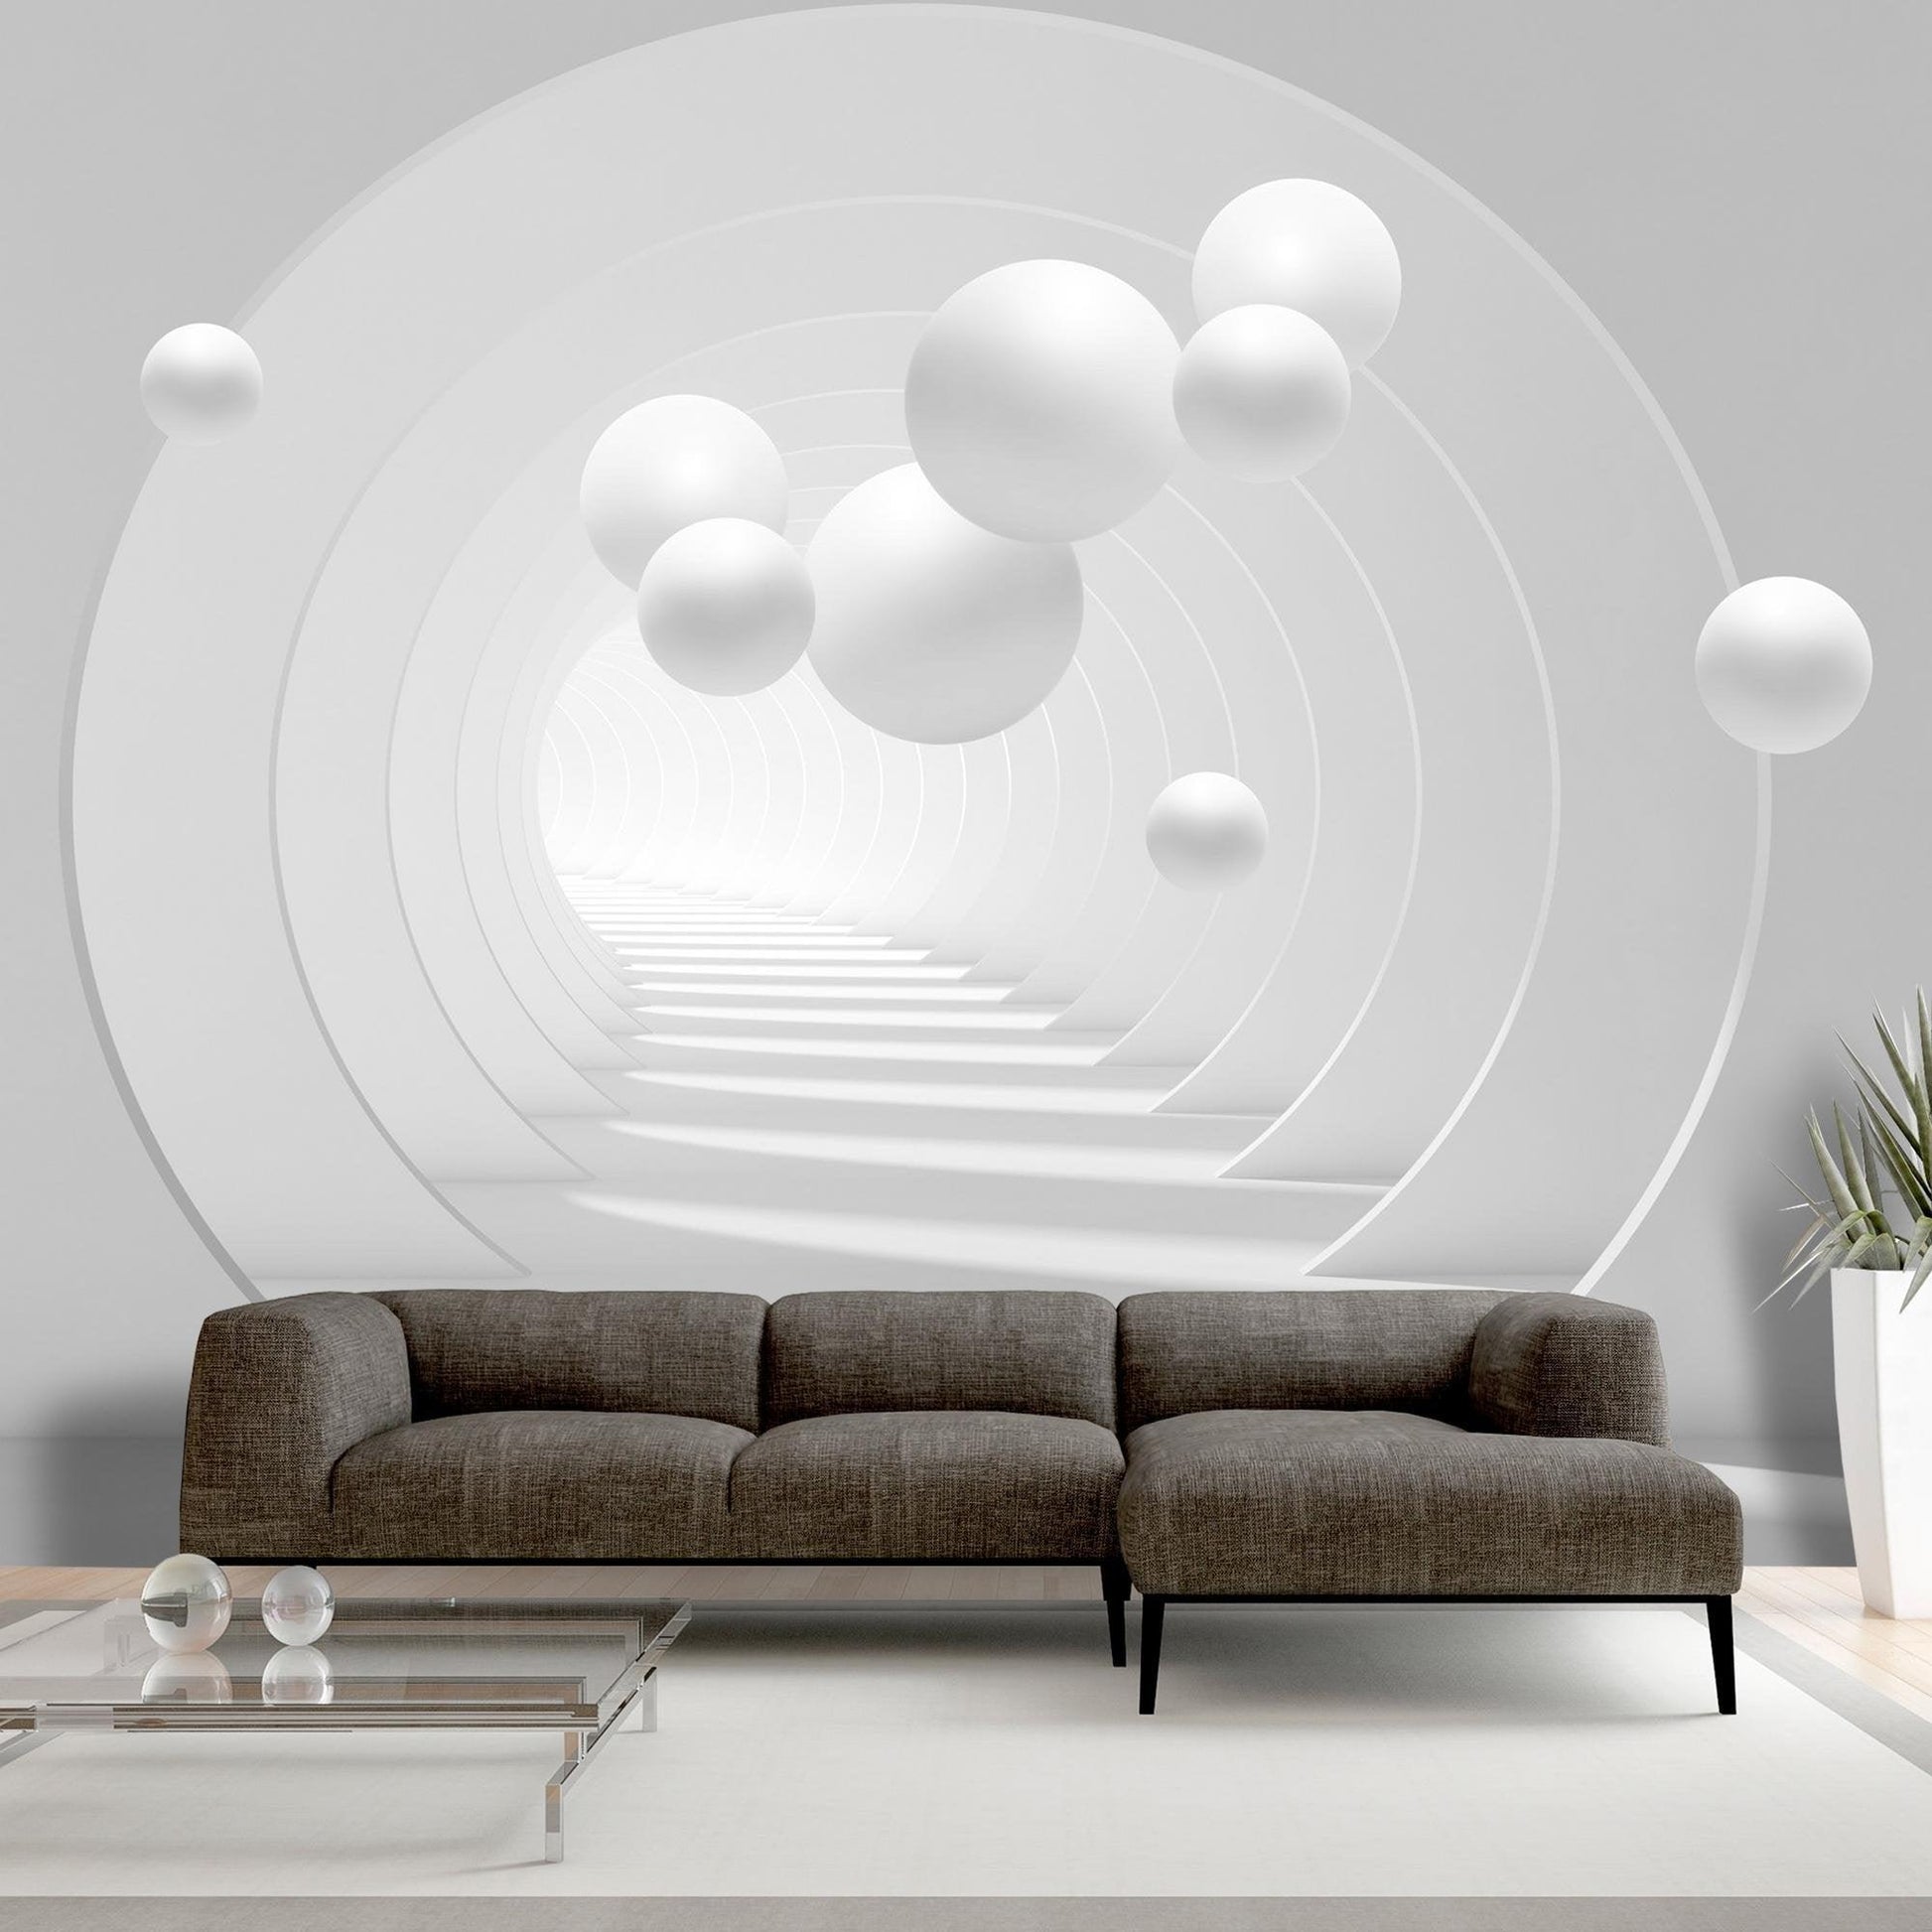 Peel and stick wall mural - 3D Tunnel - www.trendingbestsellers.com